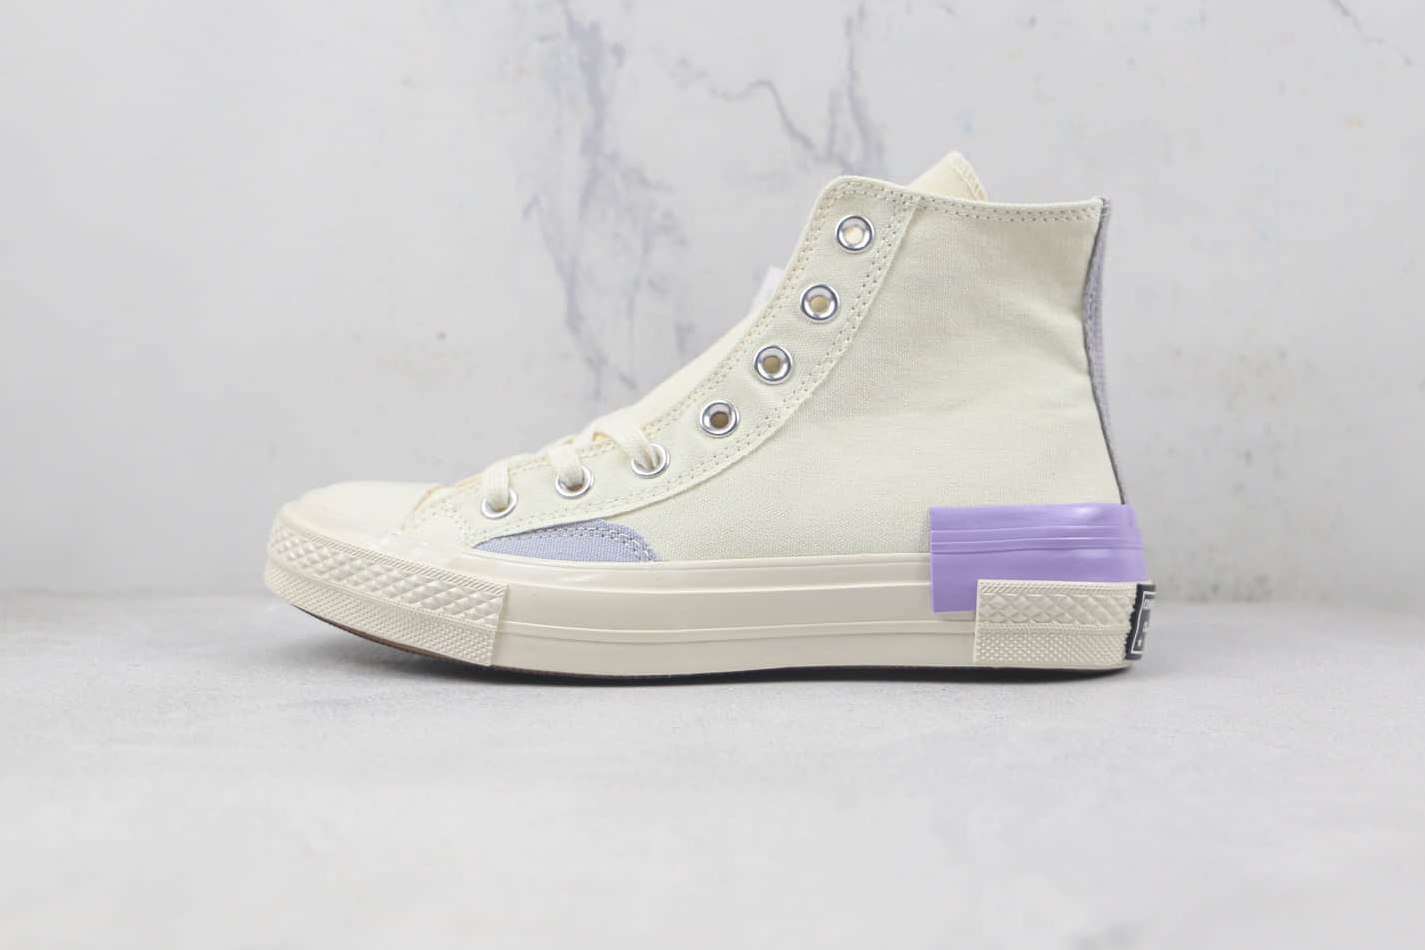 Converse Chuck 70 High 'Color Pop Layers' A03735C - Iconic Style with Vibrant Twist